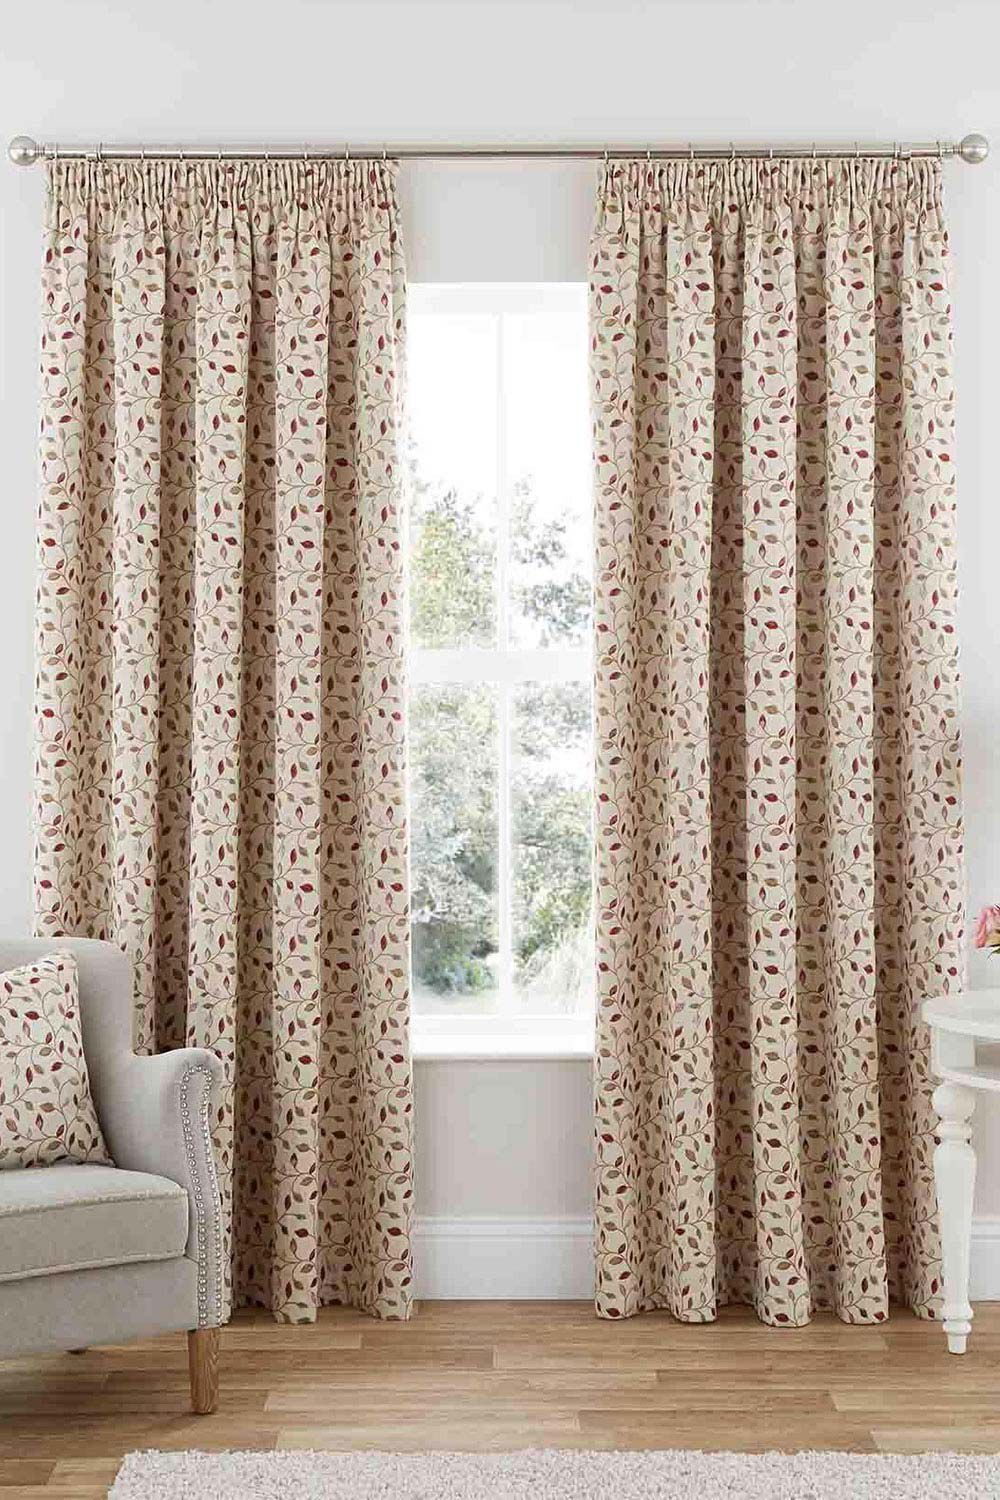 Bonmarche Red Sherbourne Jacquard Pencil Pleat Curtain Pair, Size: 66 Inch